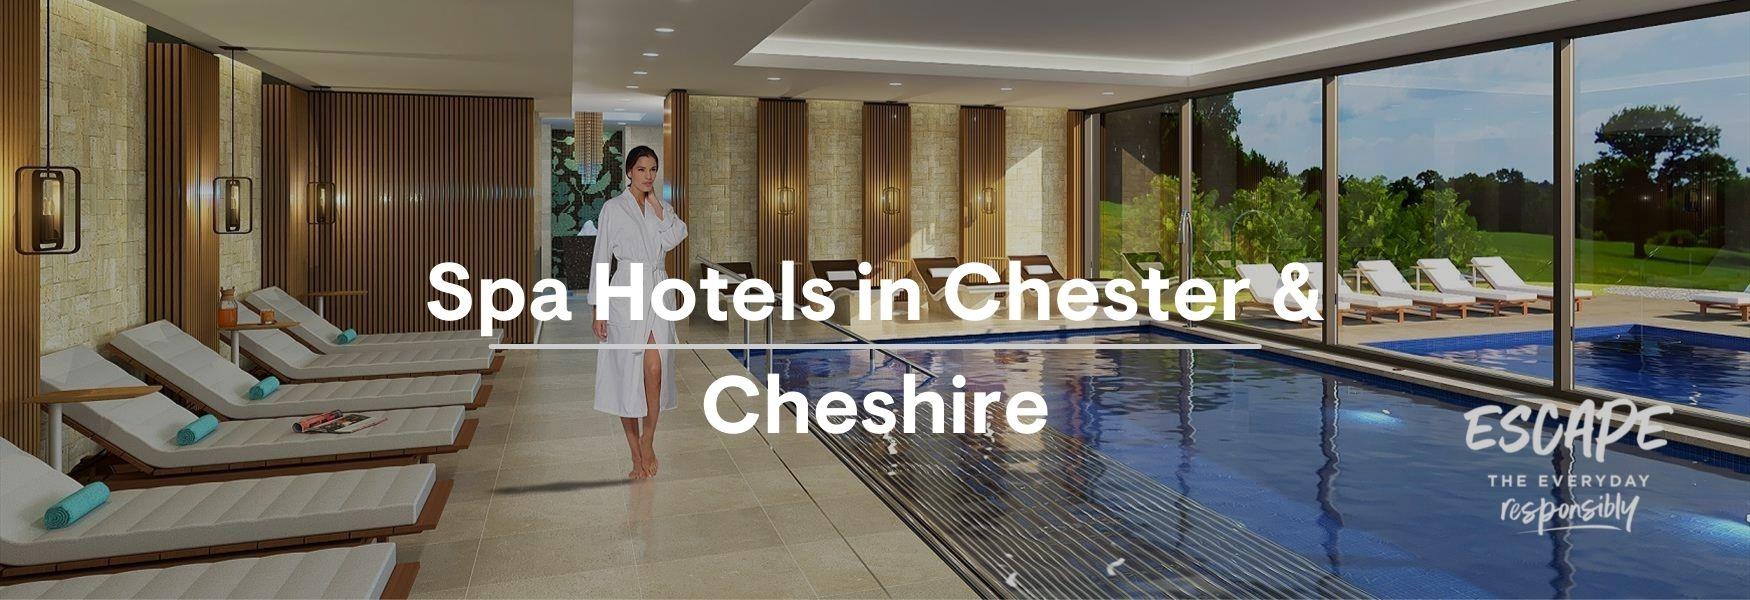 Spa Hotels in Chester and Cheshire